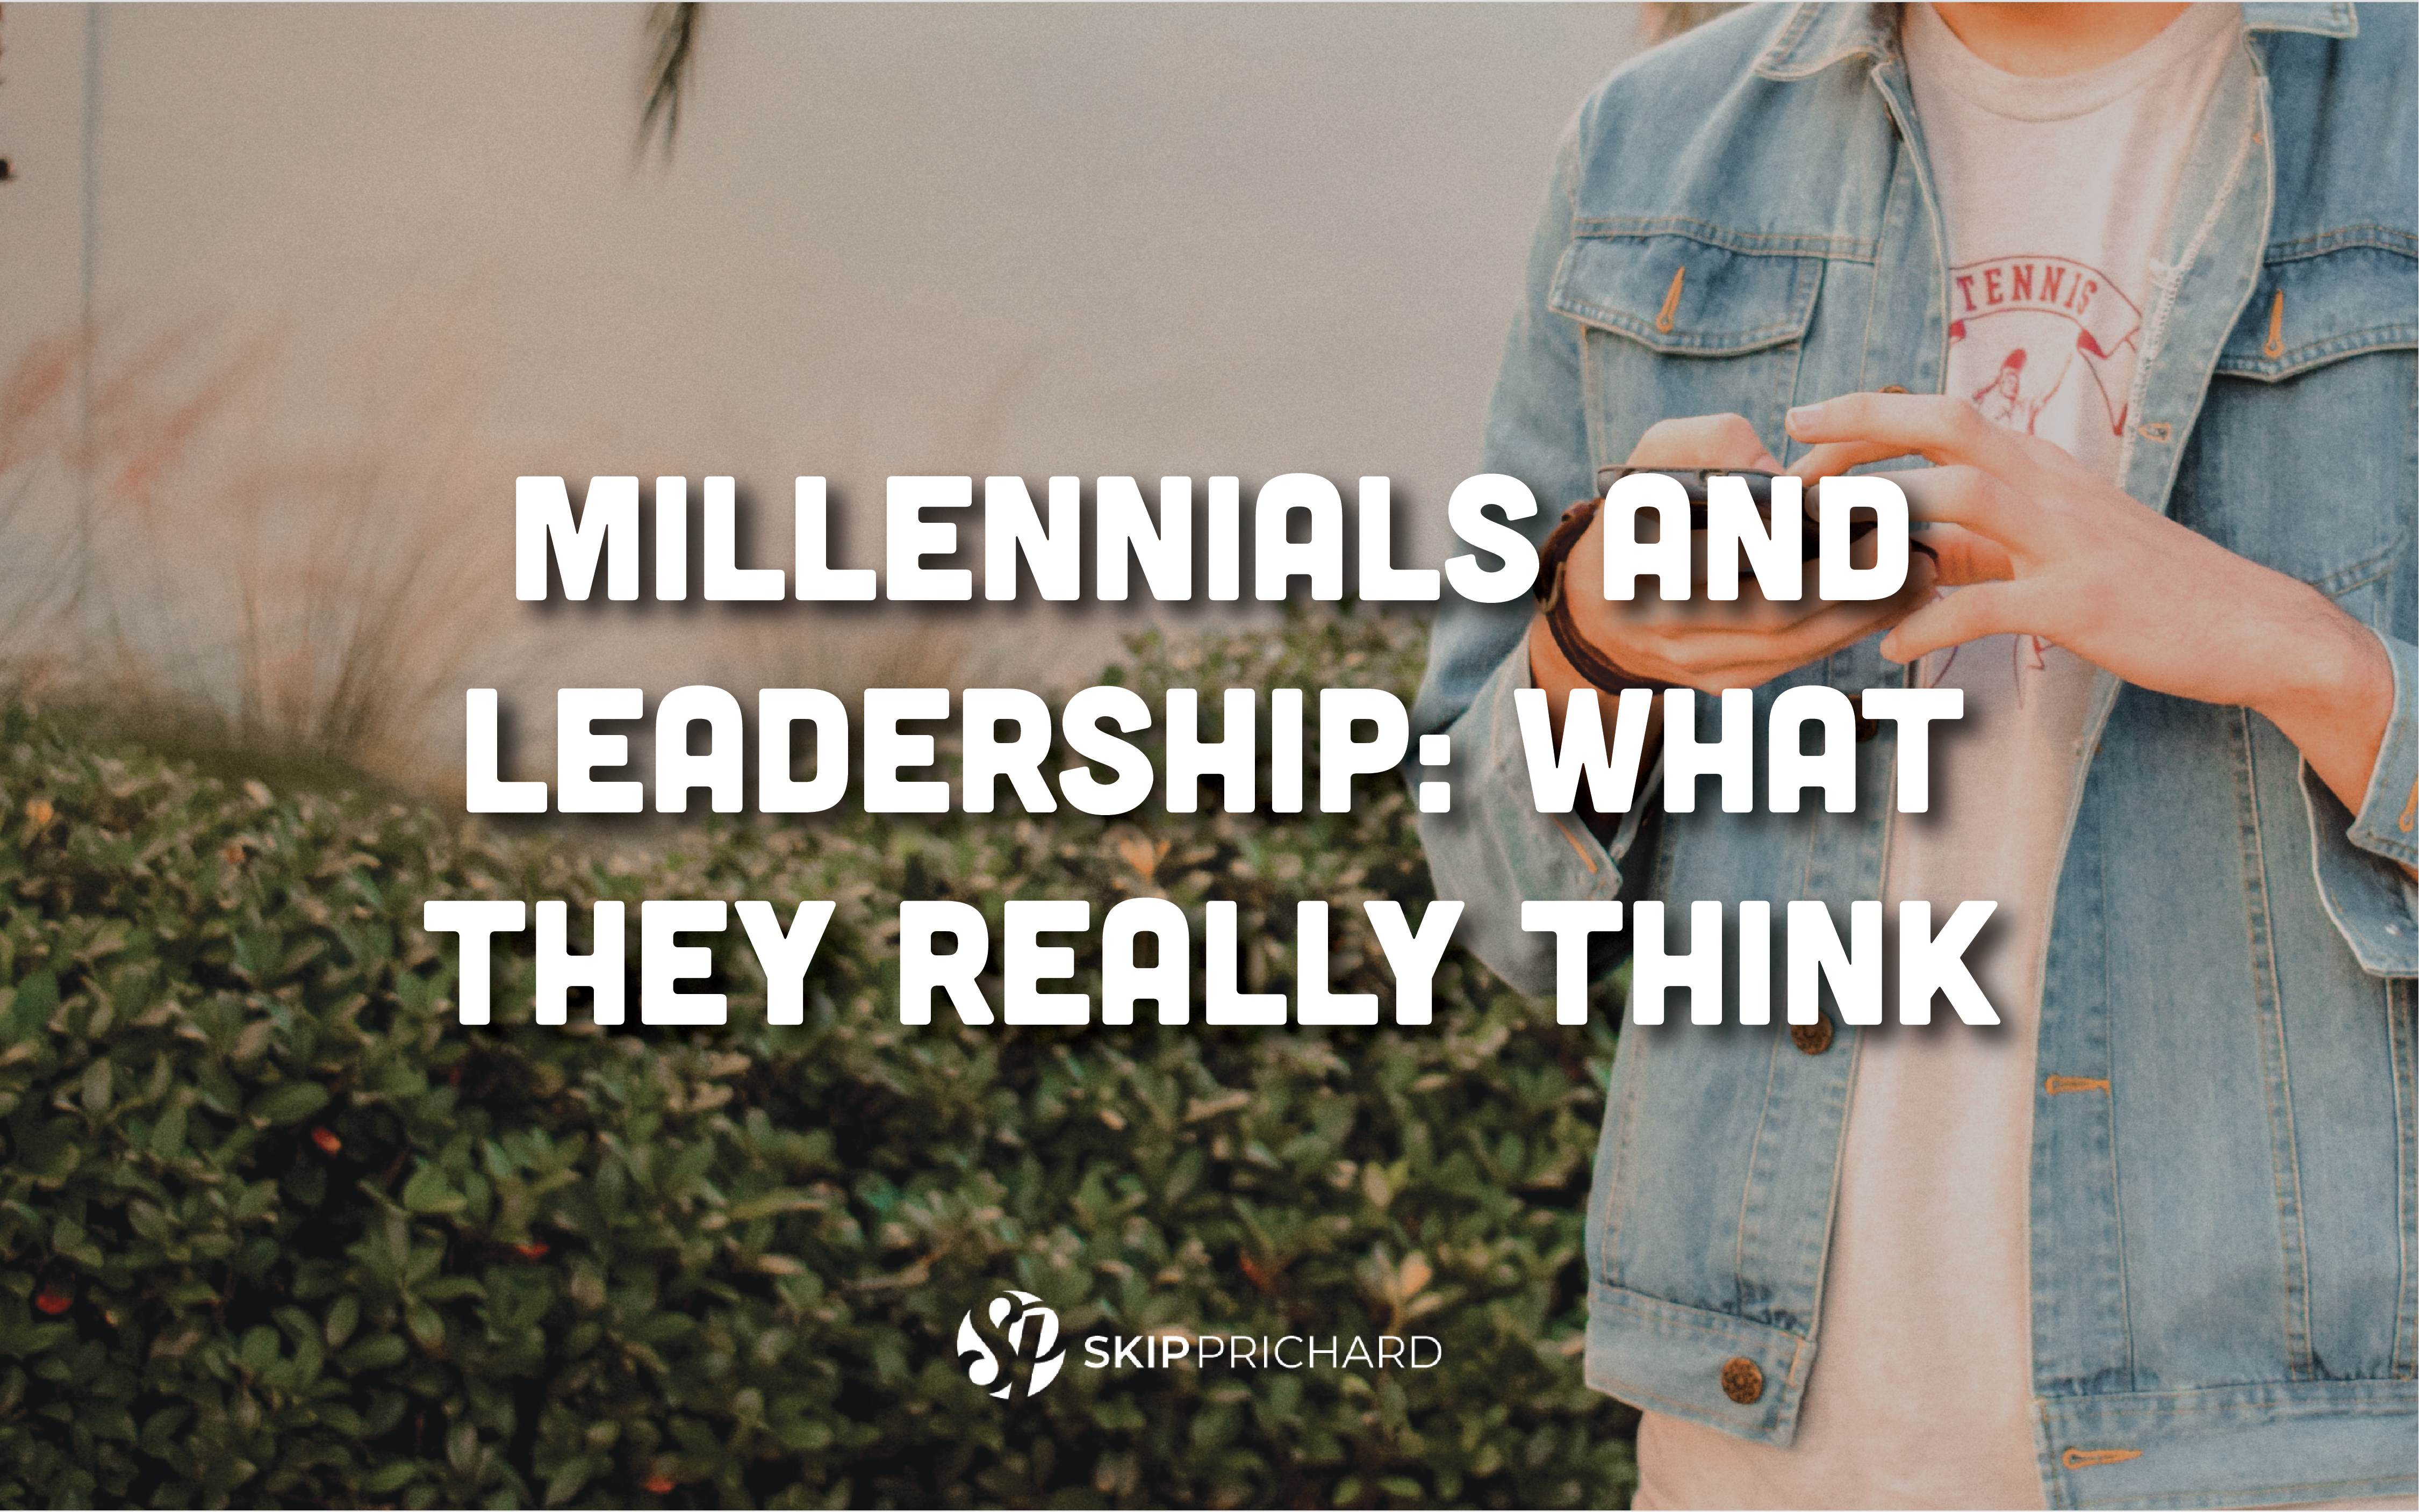 Millennials and leadership- what they really think